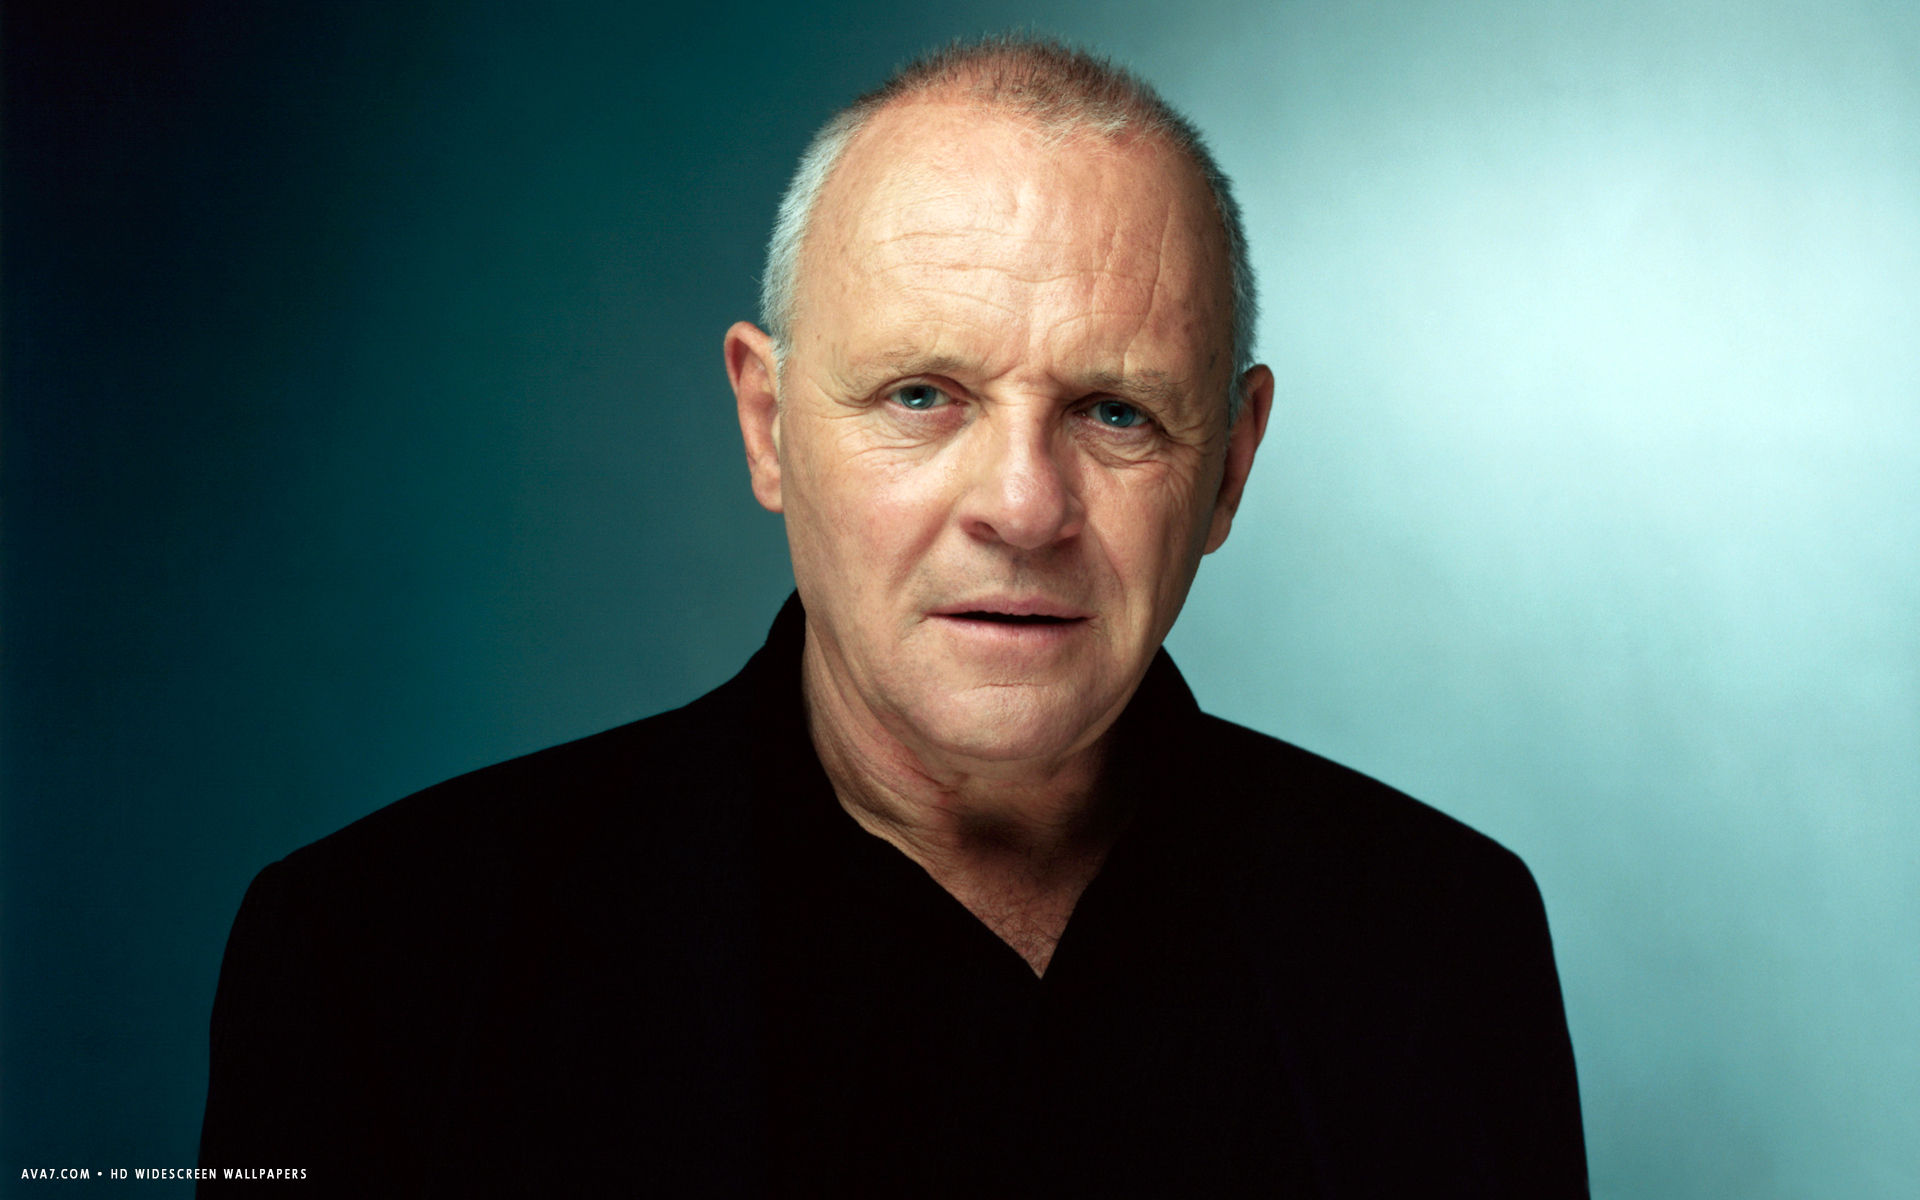 anthony hopkins actor hd widescreen wallpaper